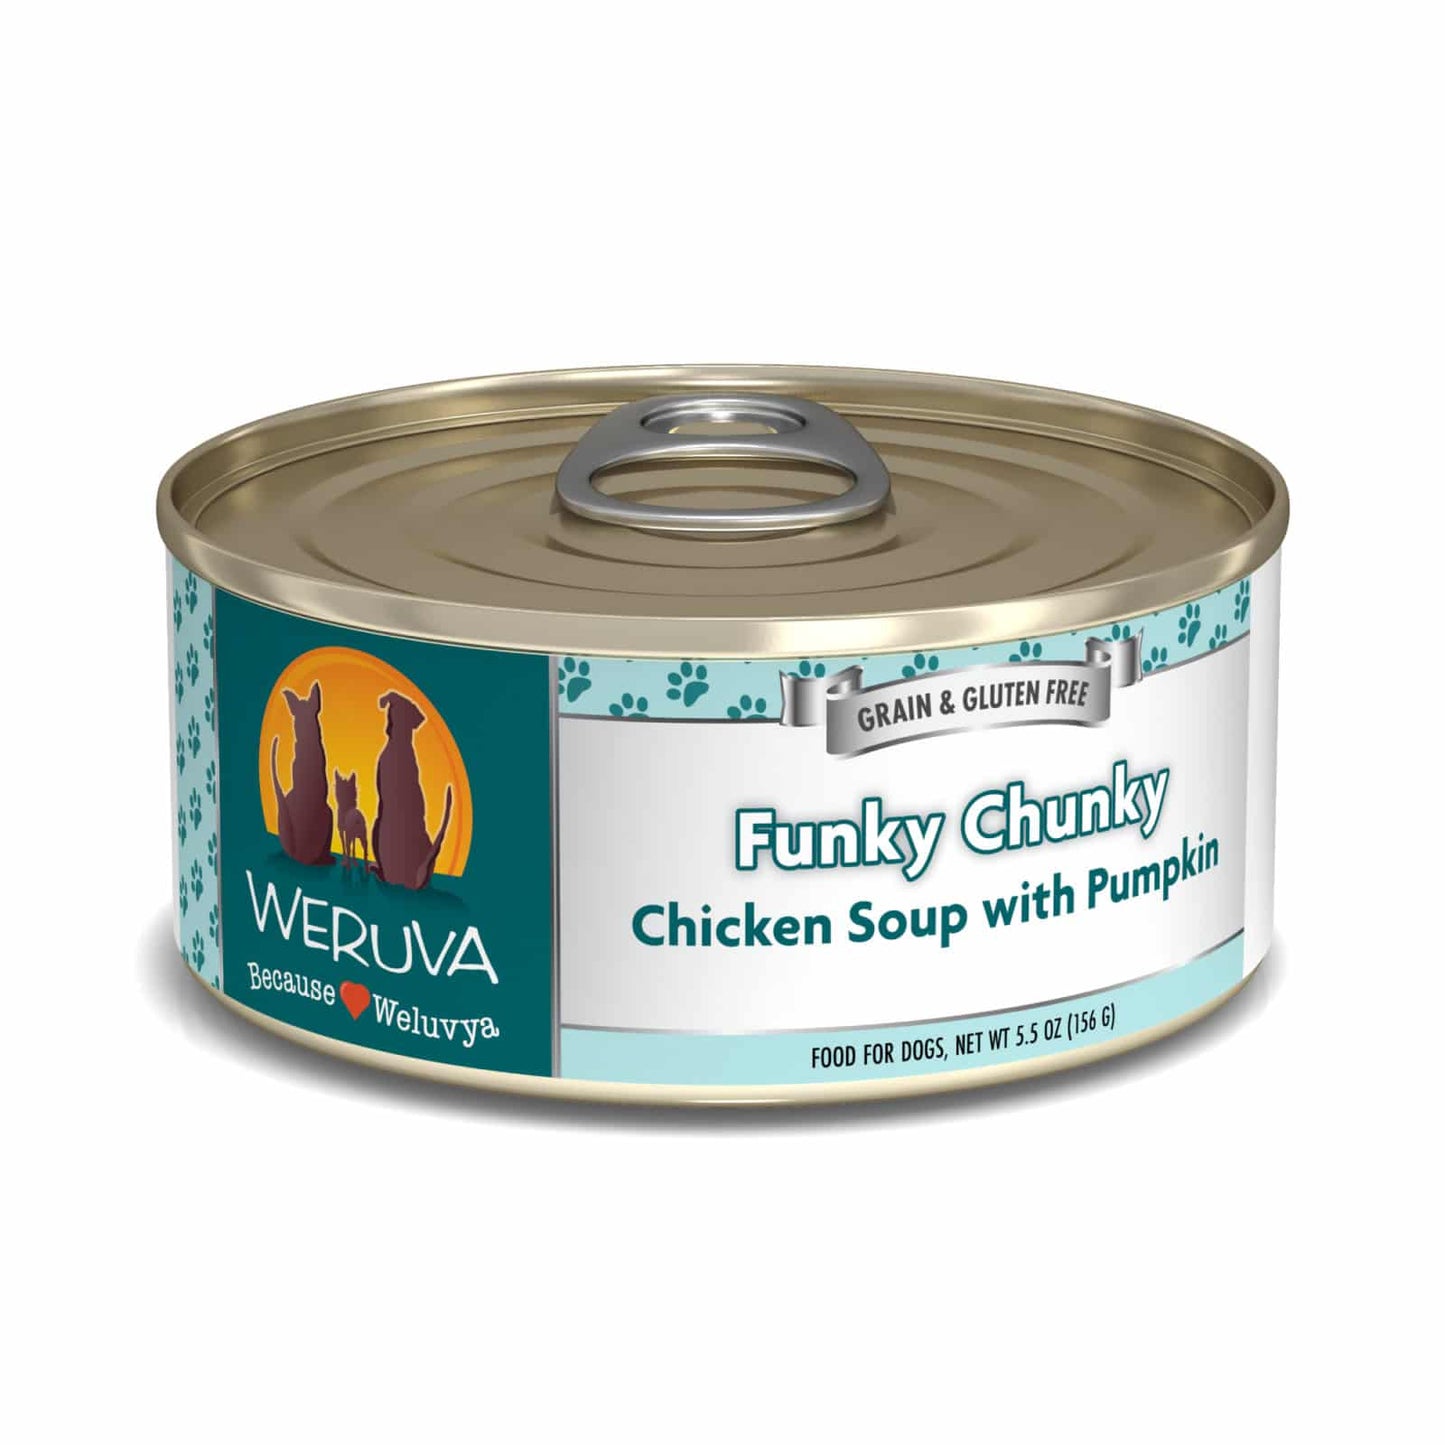 Weruva Funky Chunky Chicken Soup with Pumpkin, Wet Dog Food